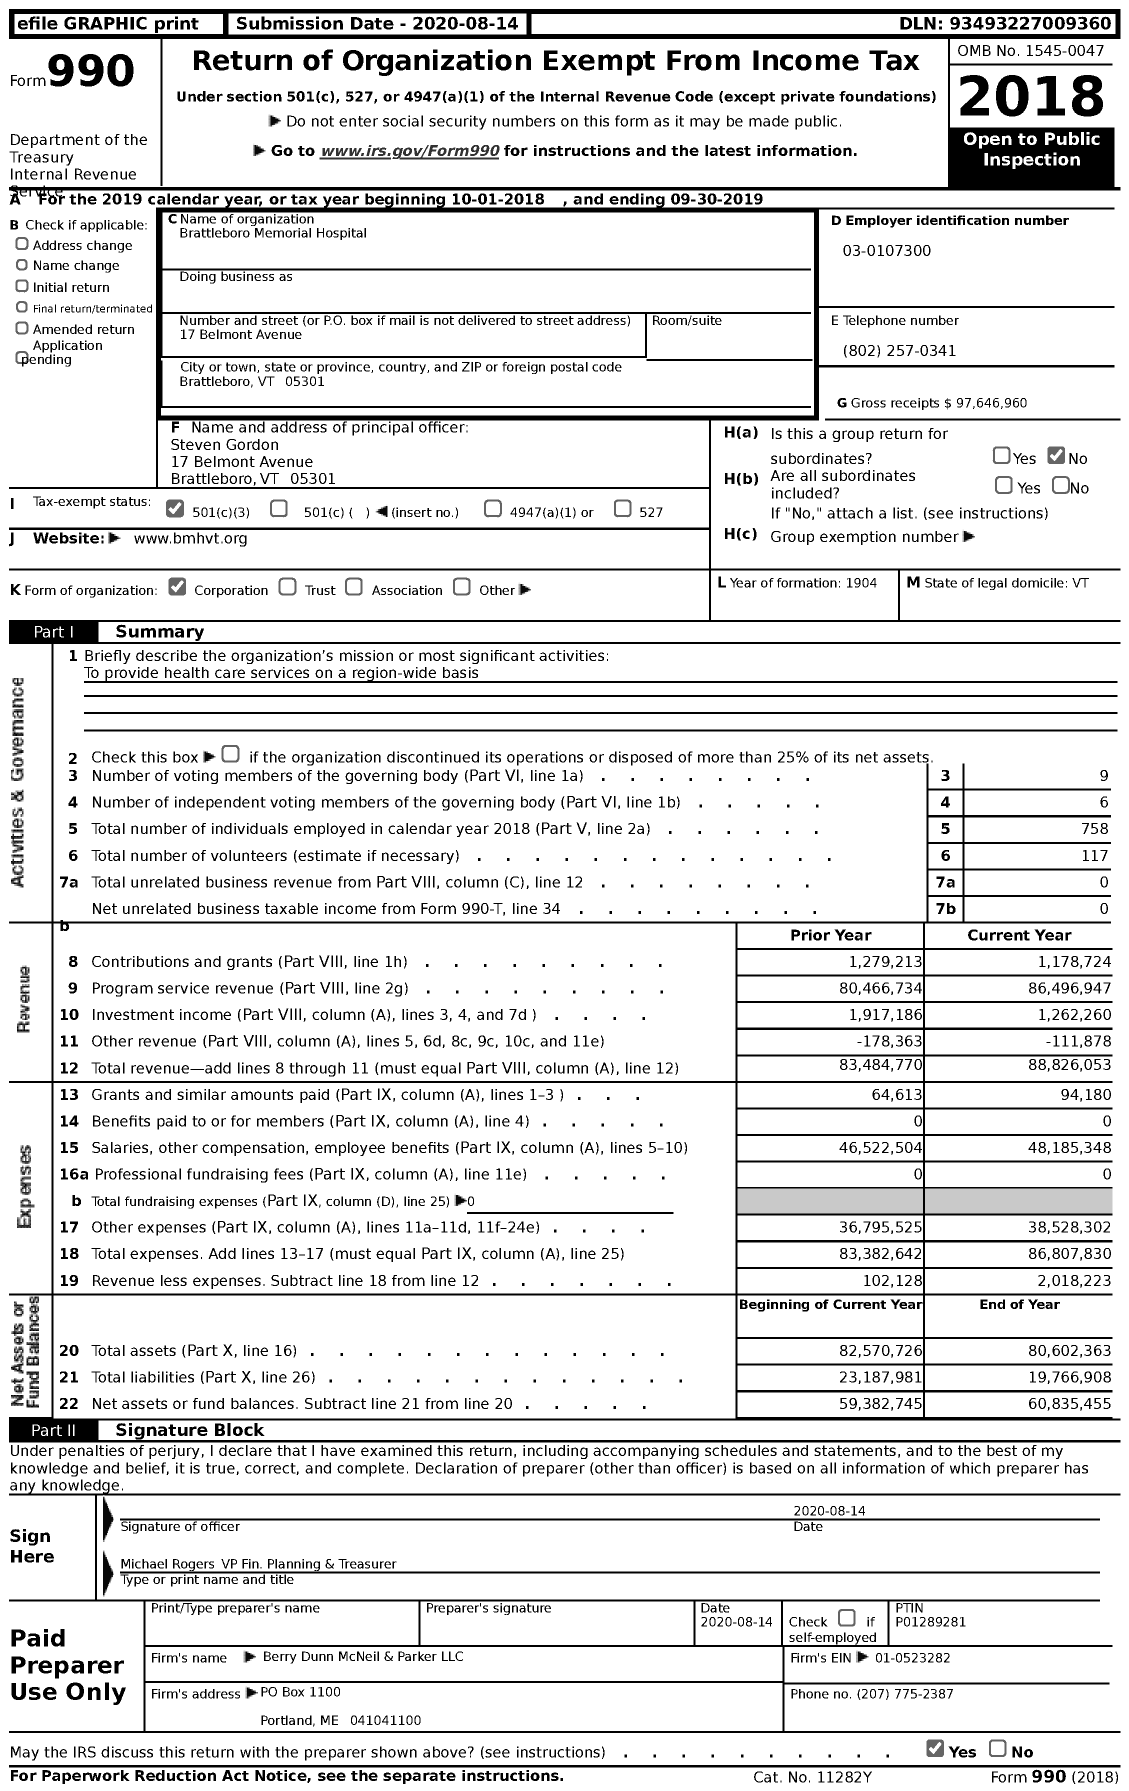 Image of first page of 2018 Form 990 for Brattleboro Memorial Hospital (BMH)